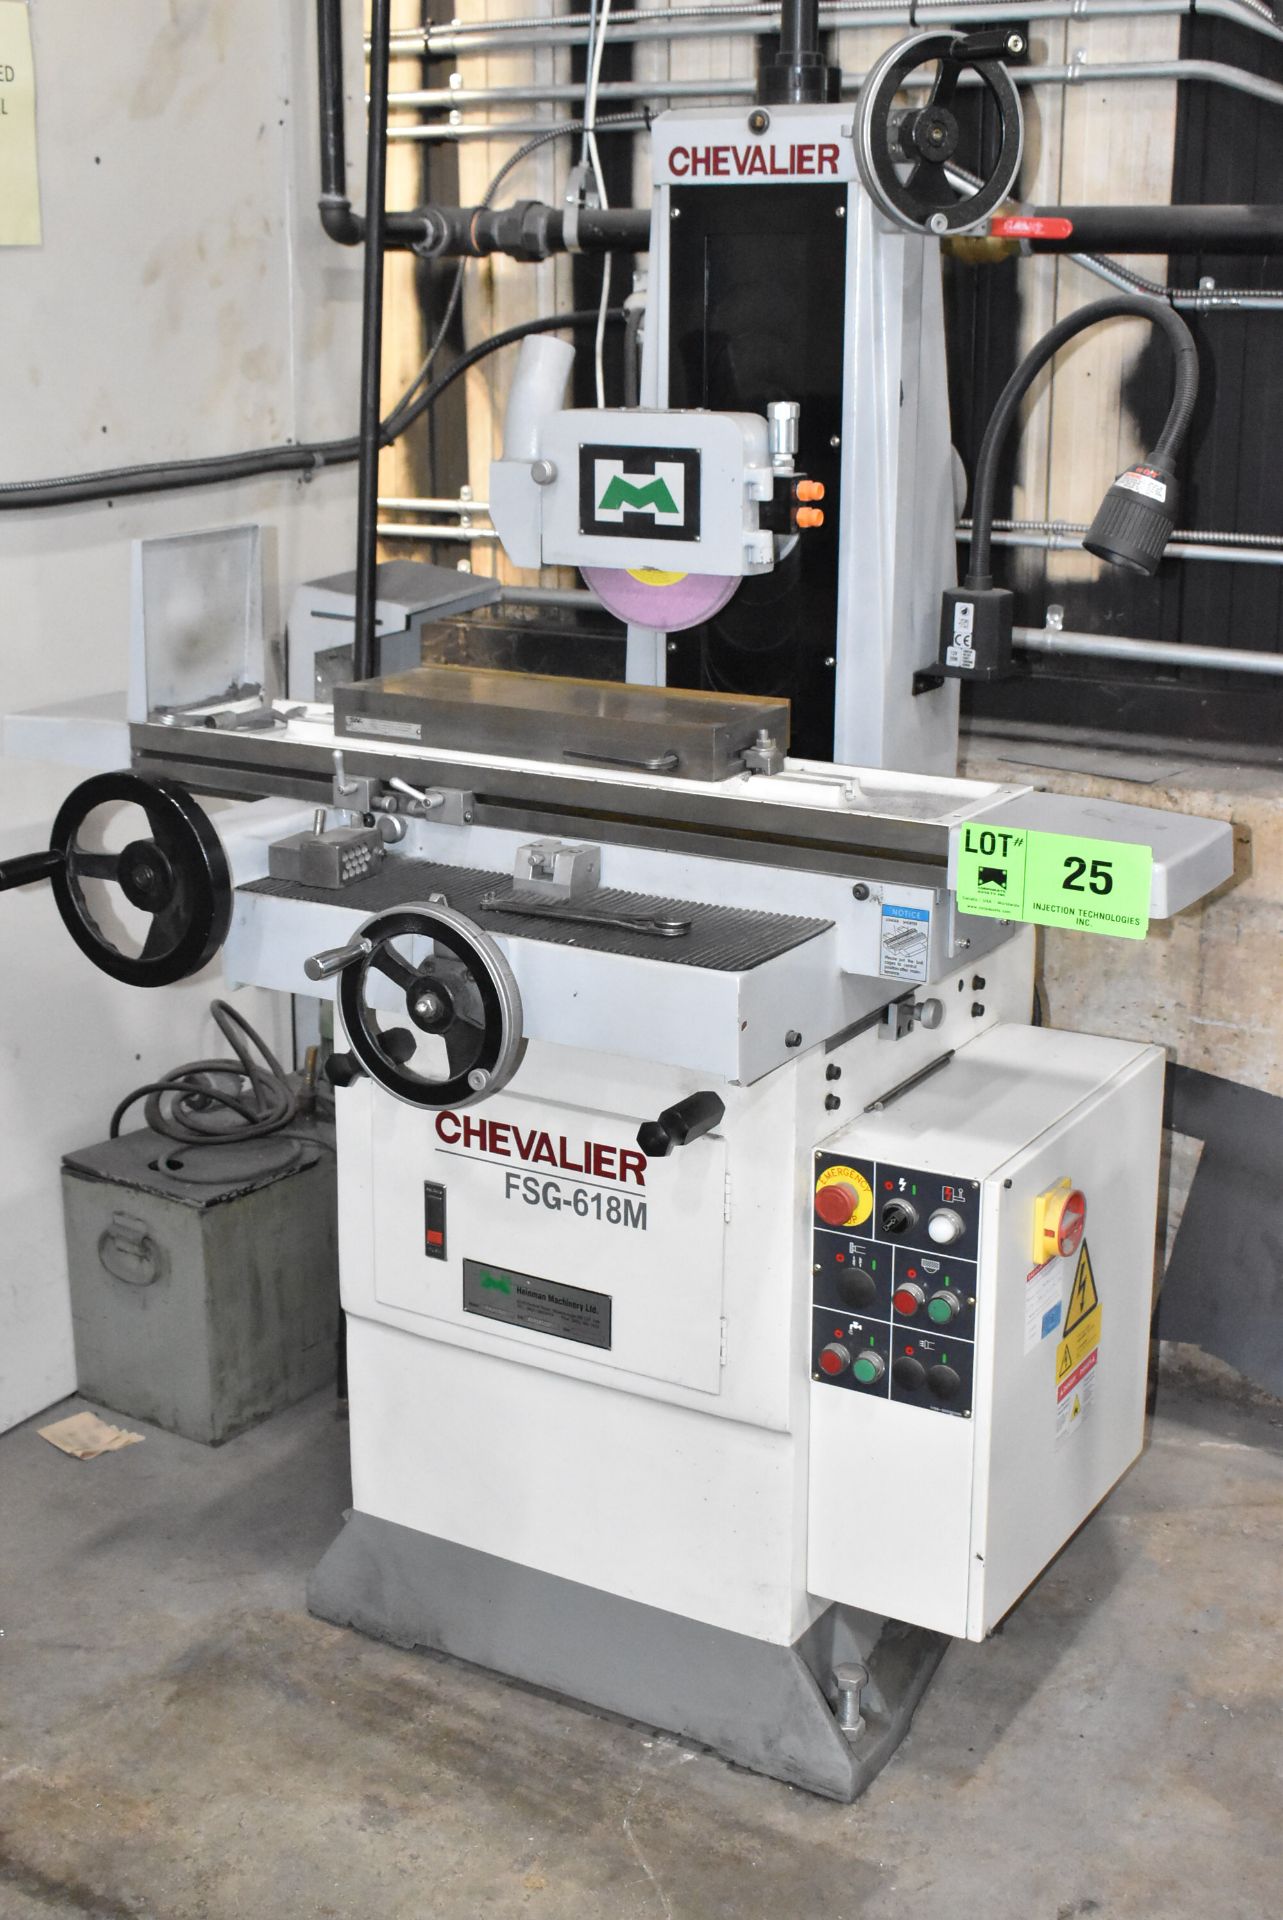 CHEVALIER FSG-618M SURFACE GRINDER WITH 6" X 18" MAGNETIC CHUCK, 8" WHEEL, INCREMENTAL DOWN FEED,